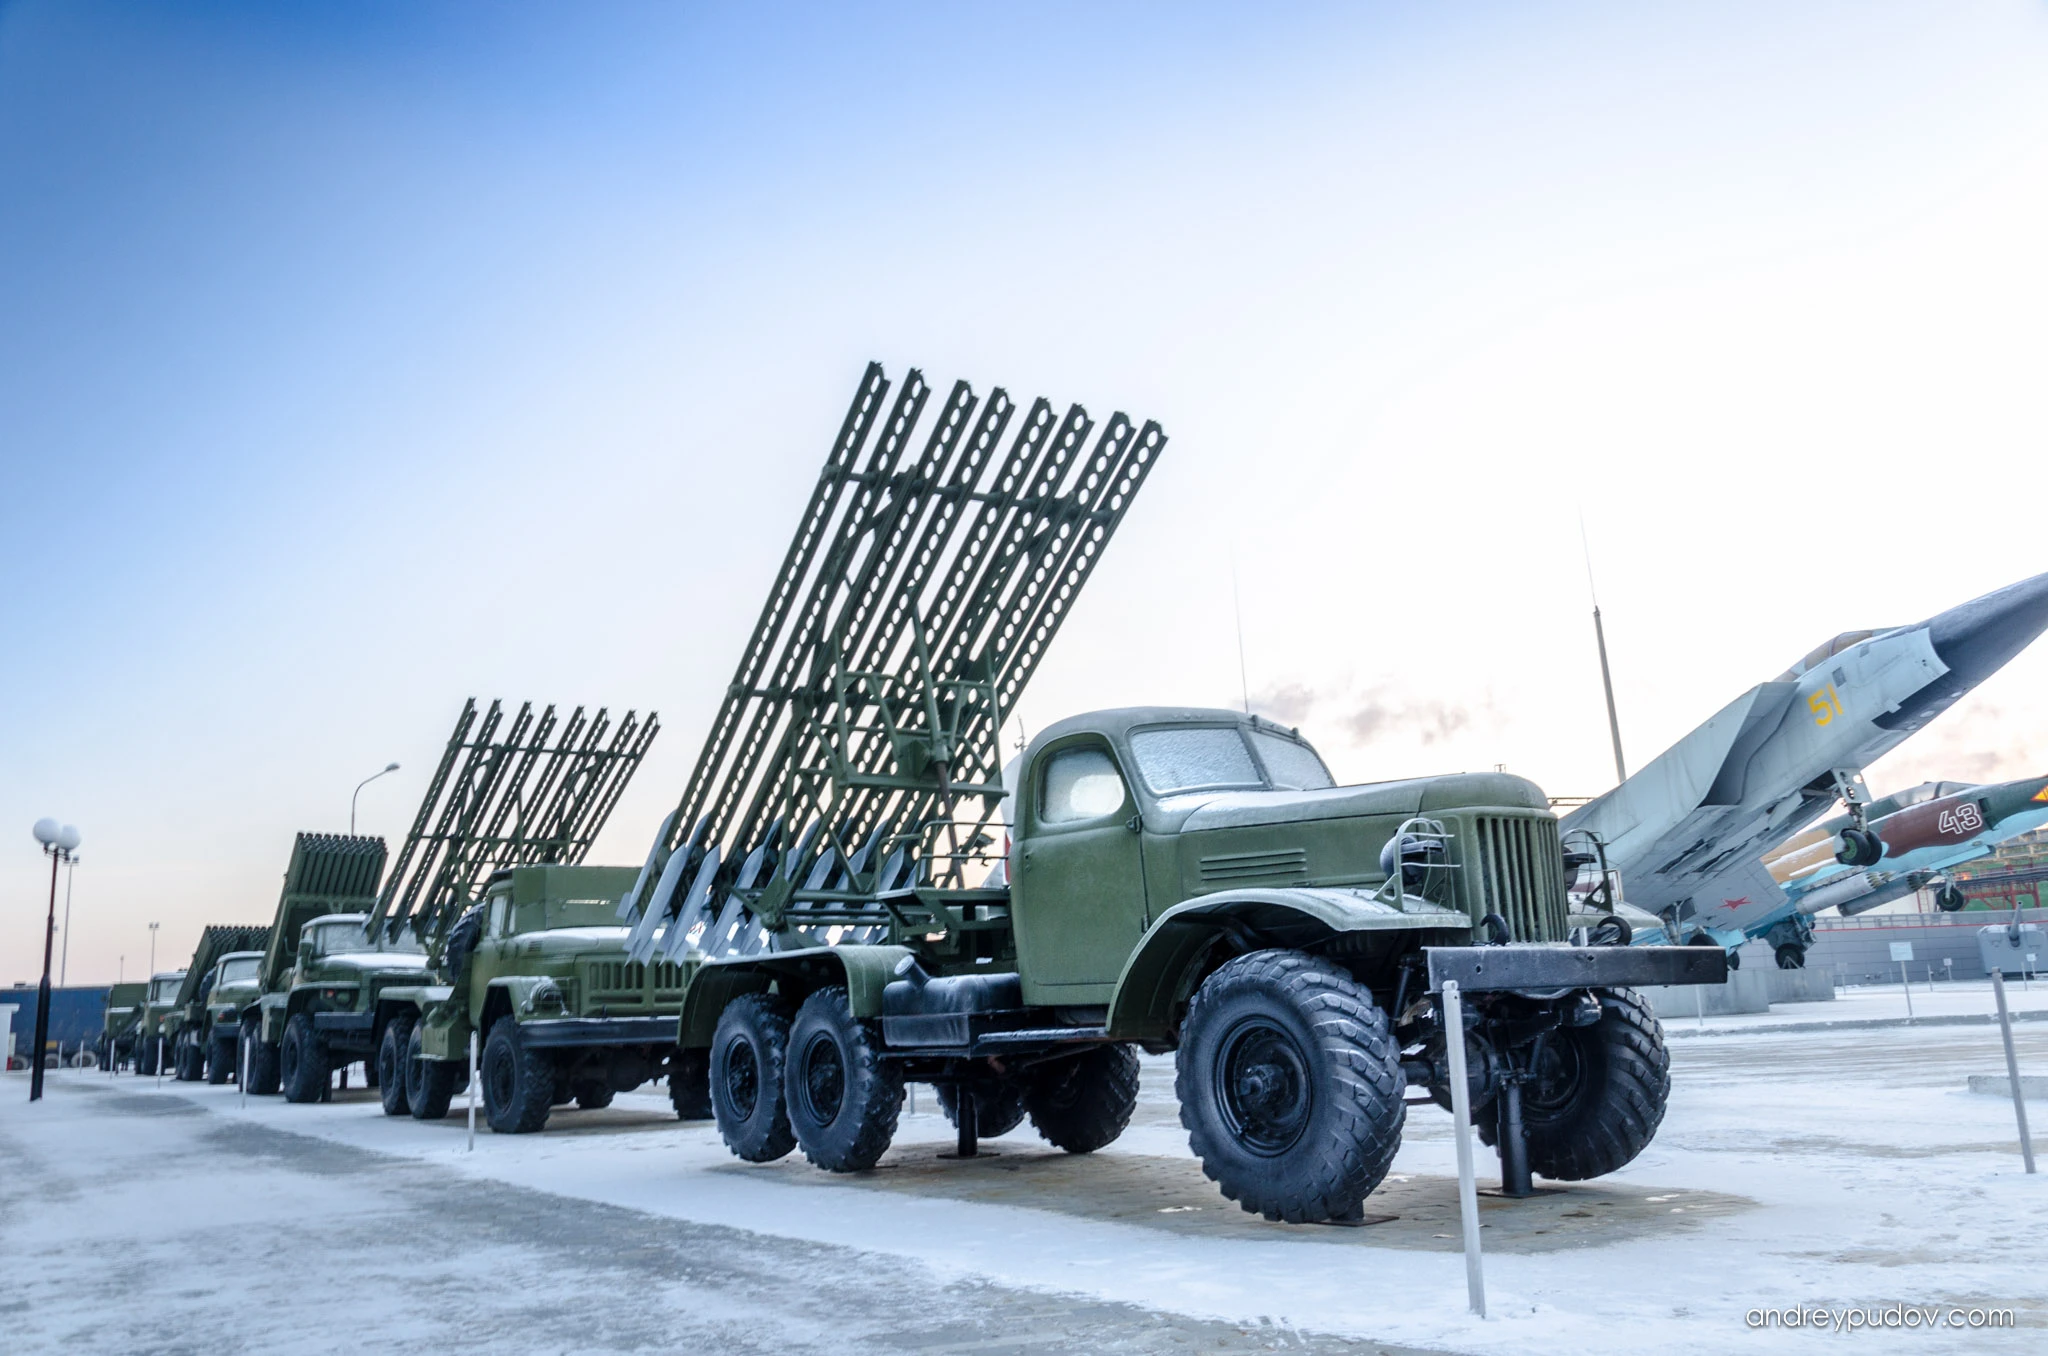 Battle Glory of the Urals - The BM-13H "Katyusha" multiple rocket launcher is a type of rocket artillery first built and fielded by the Soviet Union in World War II. Multiple rocket launchers such as these deliver explosives to a target area more intensively than conventional artillery.